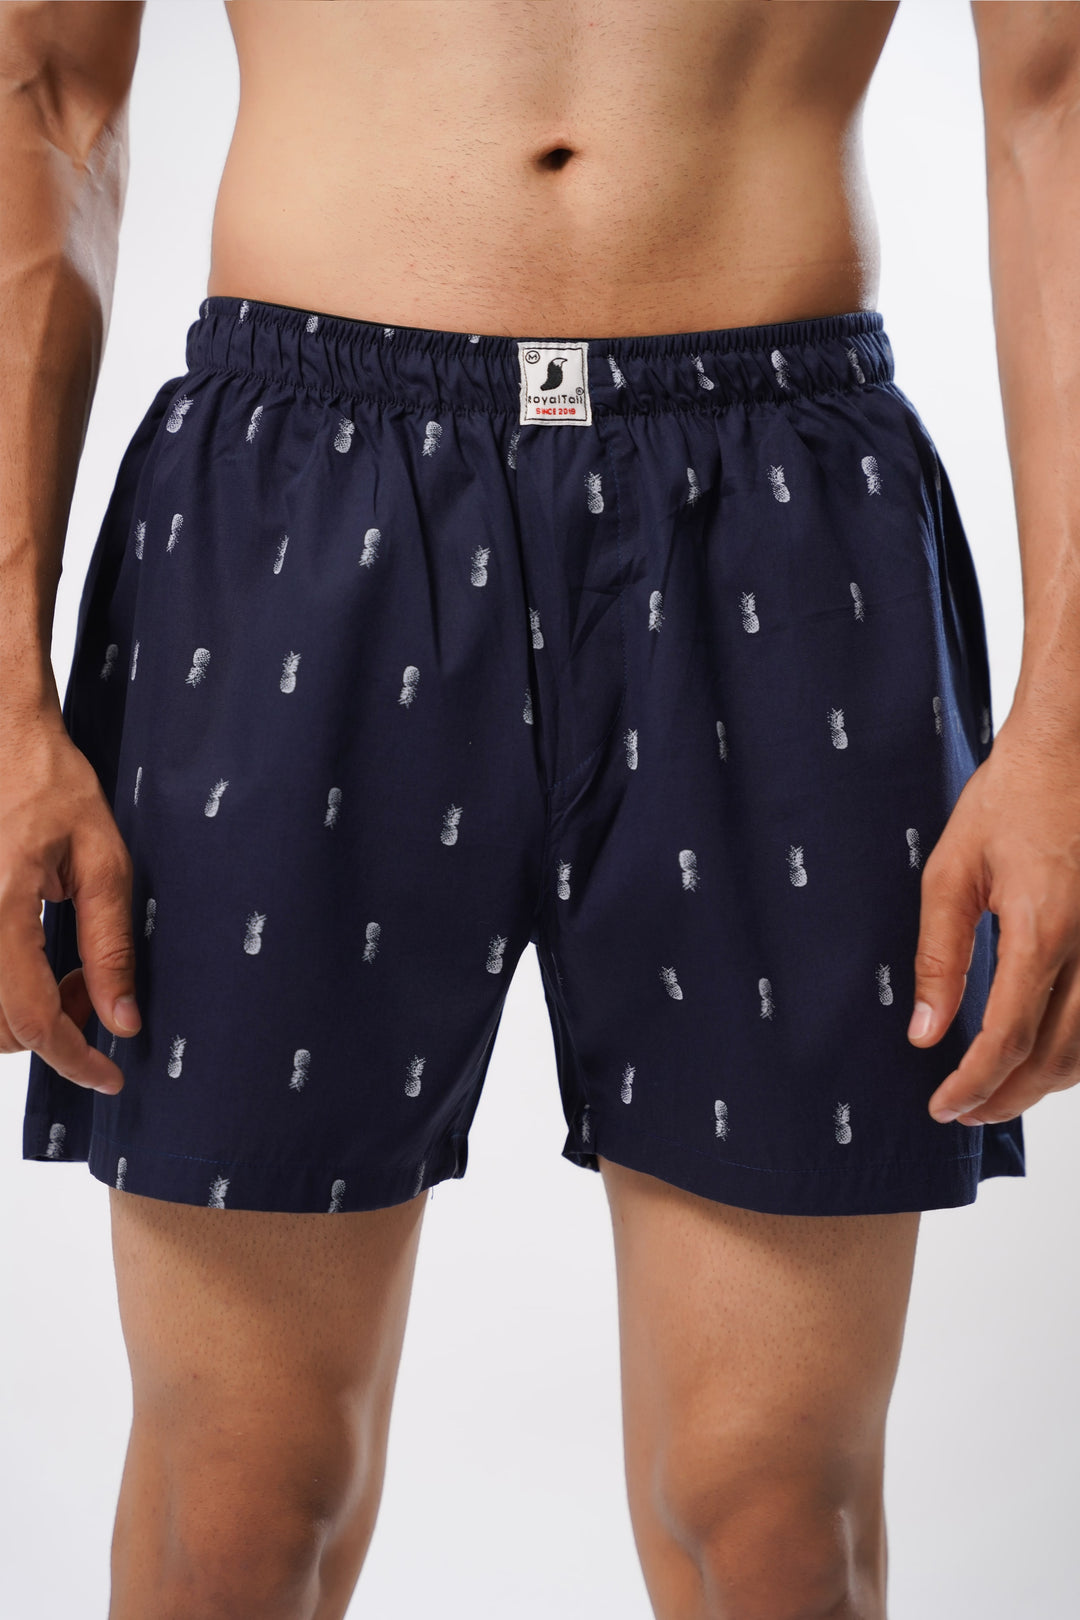 NAVY BLUE ALL OVER MINI COCONUT PRINTED MENS BOXERS